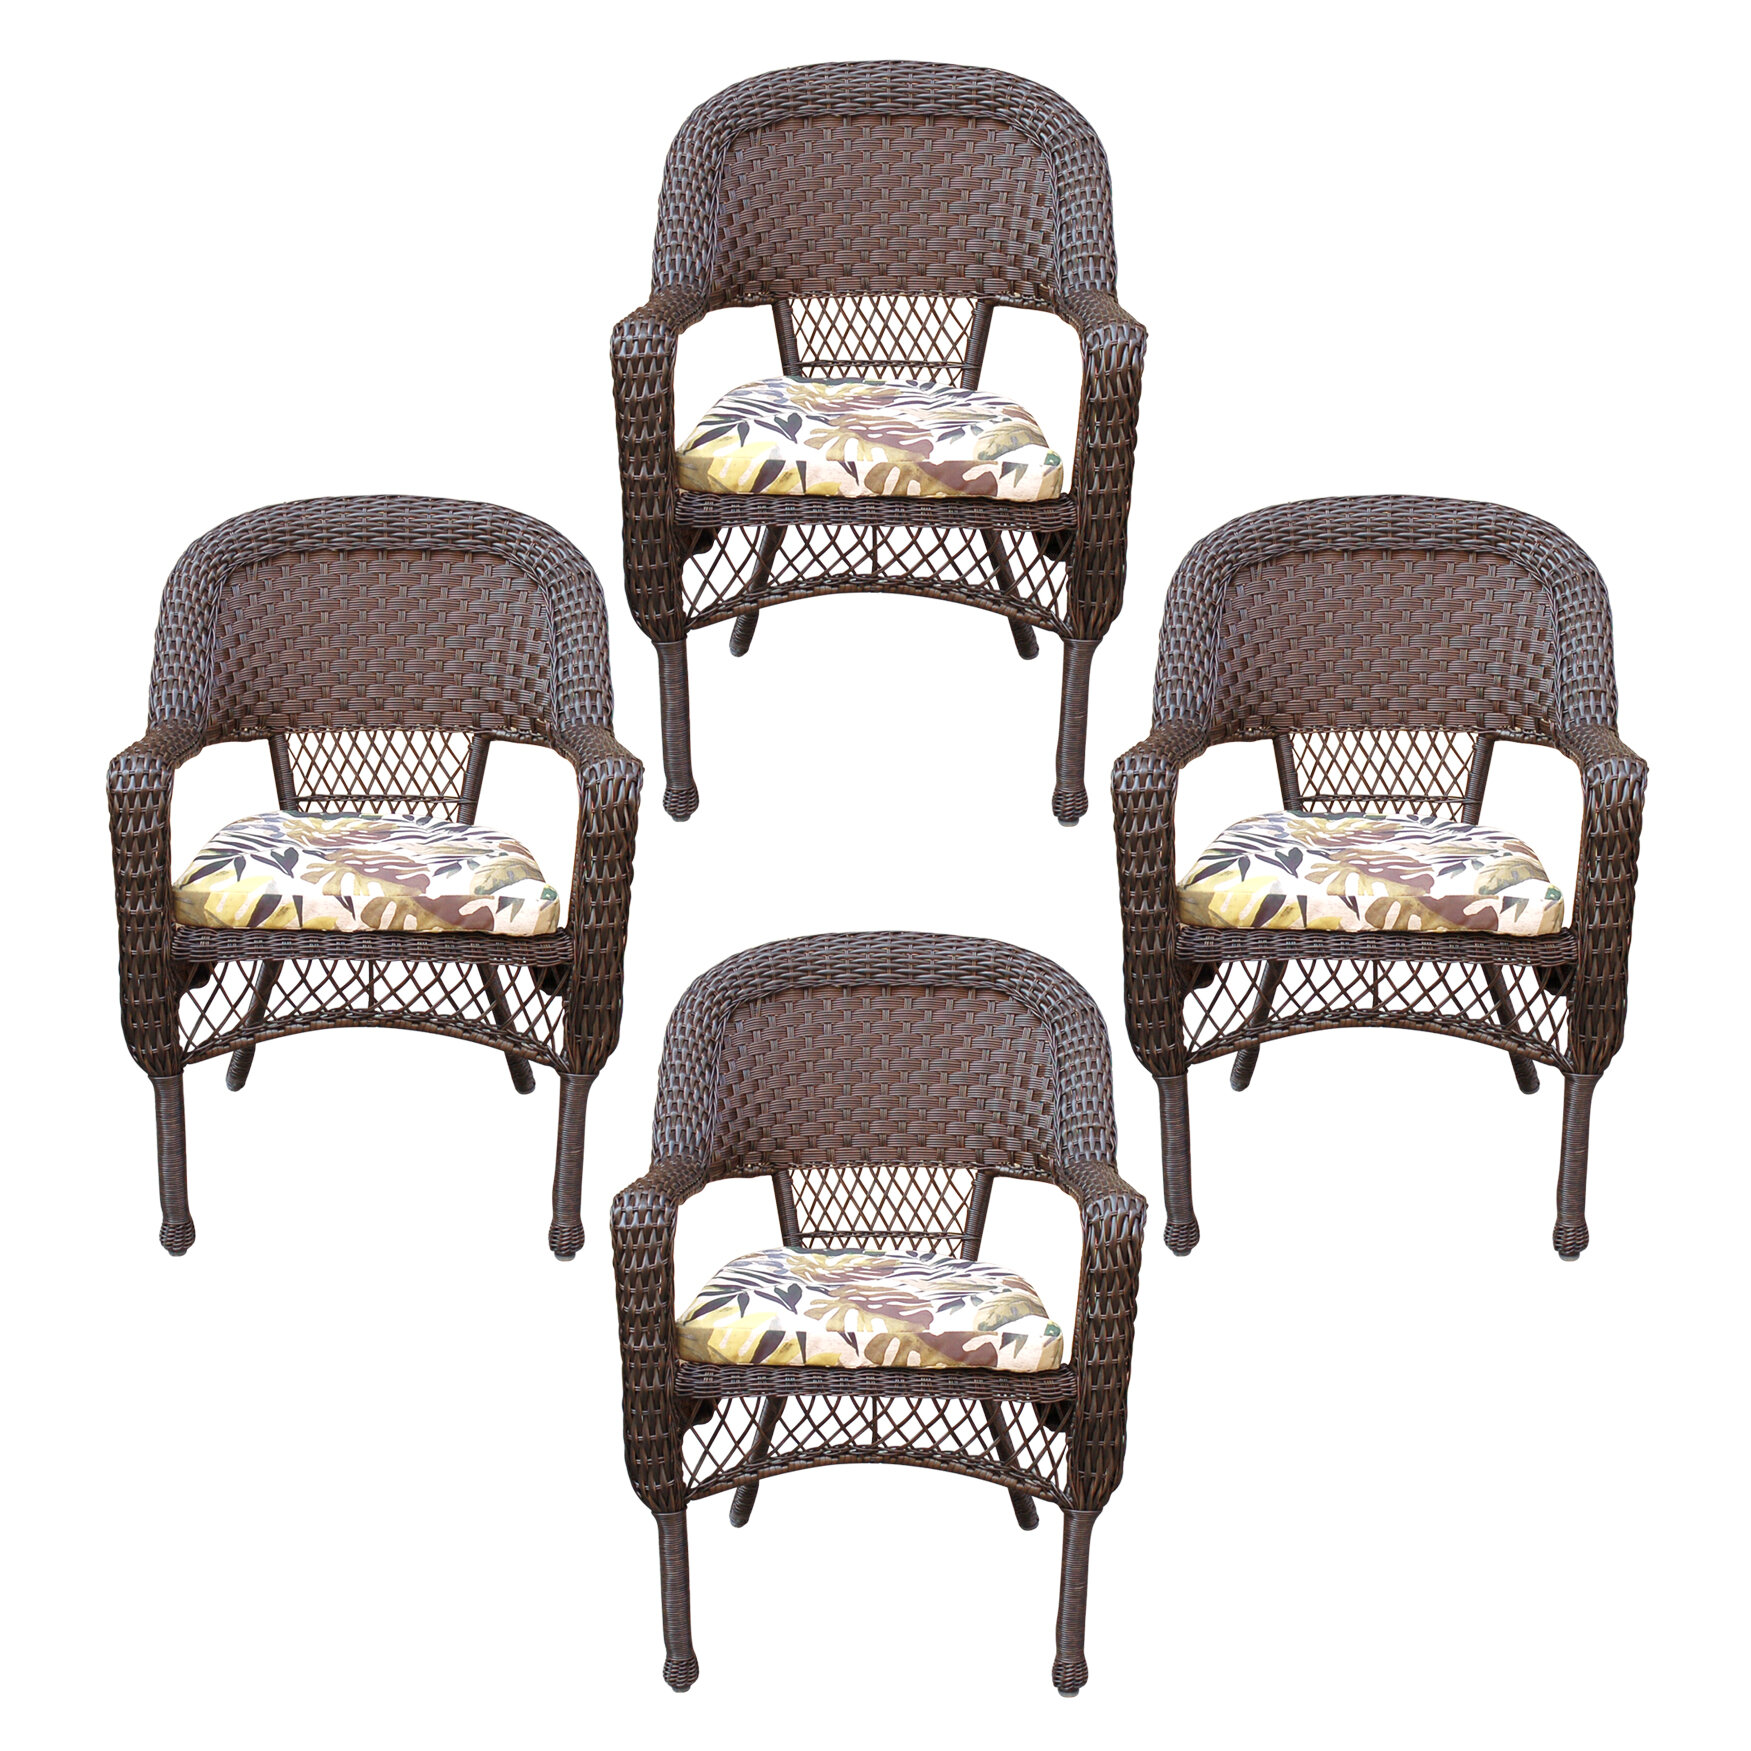 Outdoor All Weather 3pc Wicker Settee Chair CUSHION SET Red Spice Floral